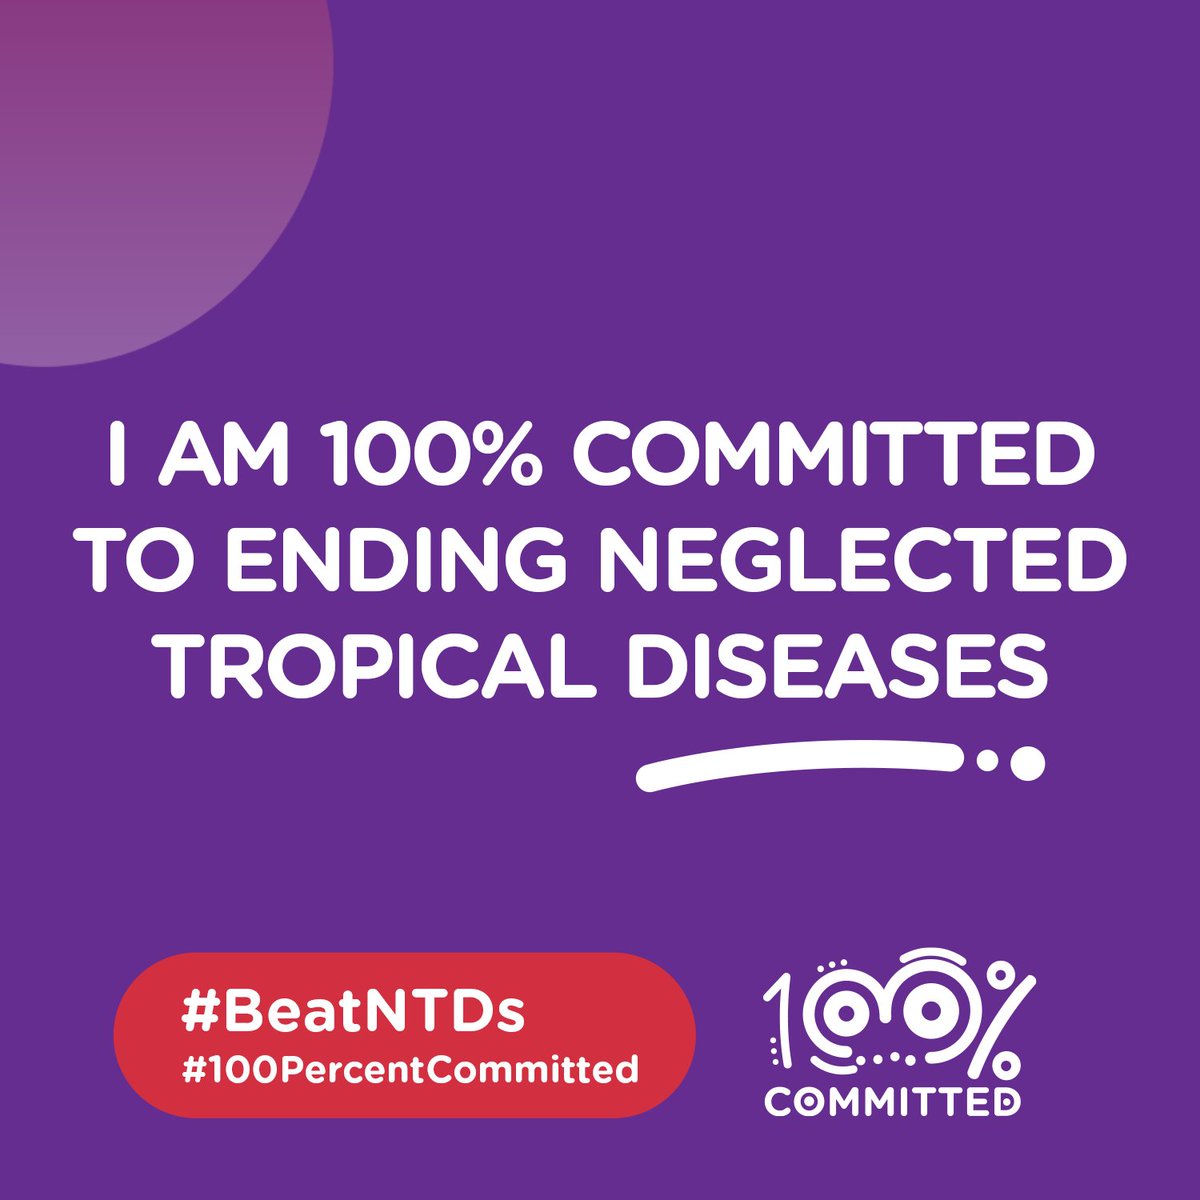 Today = #WorldNTDDay 1.7 BILLION people have NTDs, millions of lives lost/year, millions of children who will never even have a chance to reach their full potential because of TREATABLE diseases. How are you helping #EndTheNeglect today? #BeatNTDs #100PercentCommitted #IDTwitter